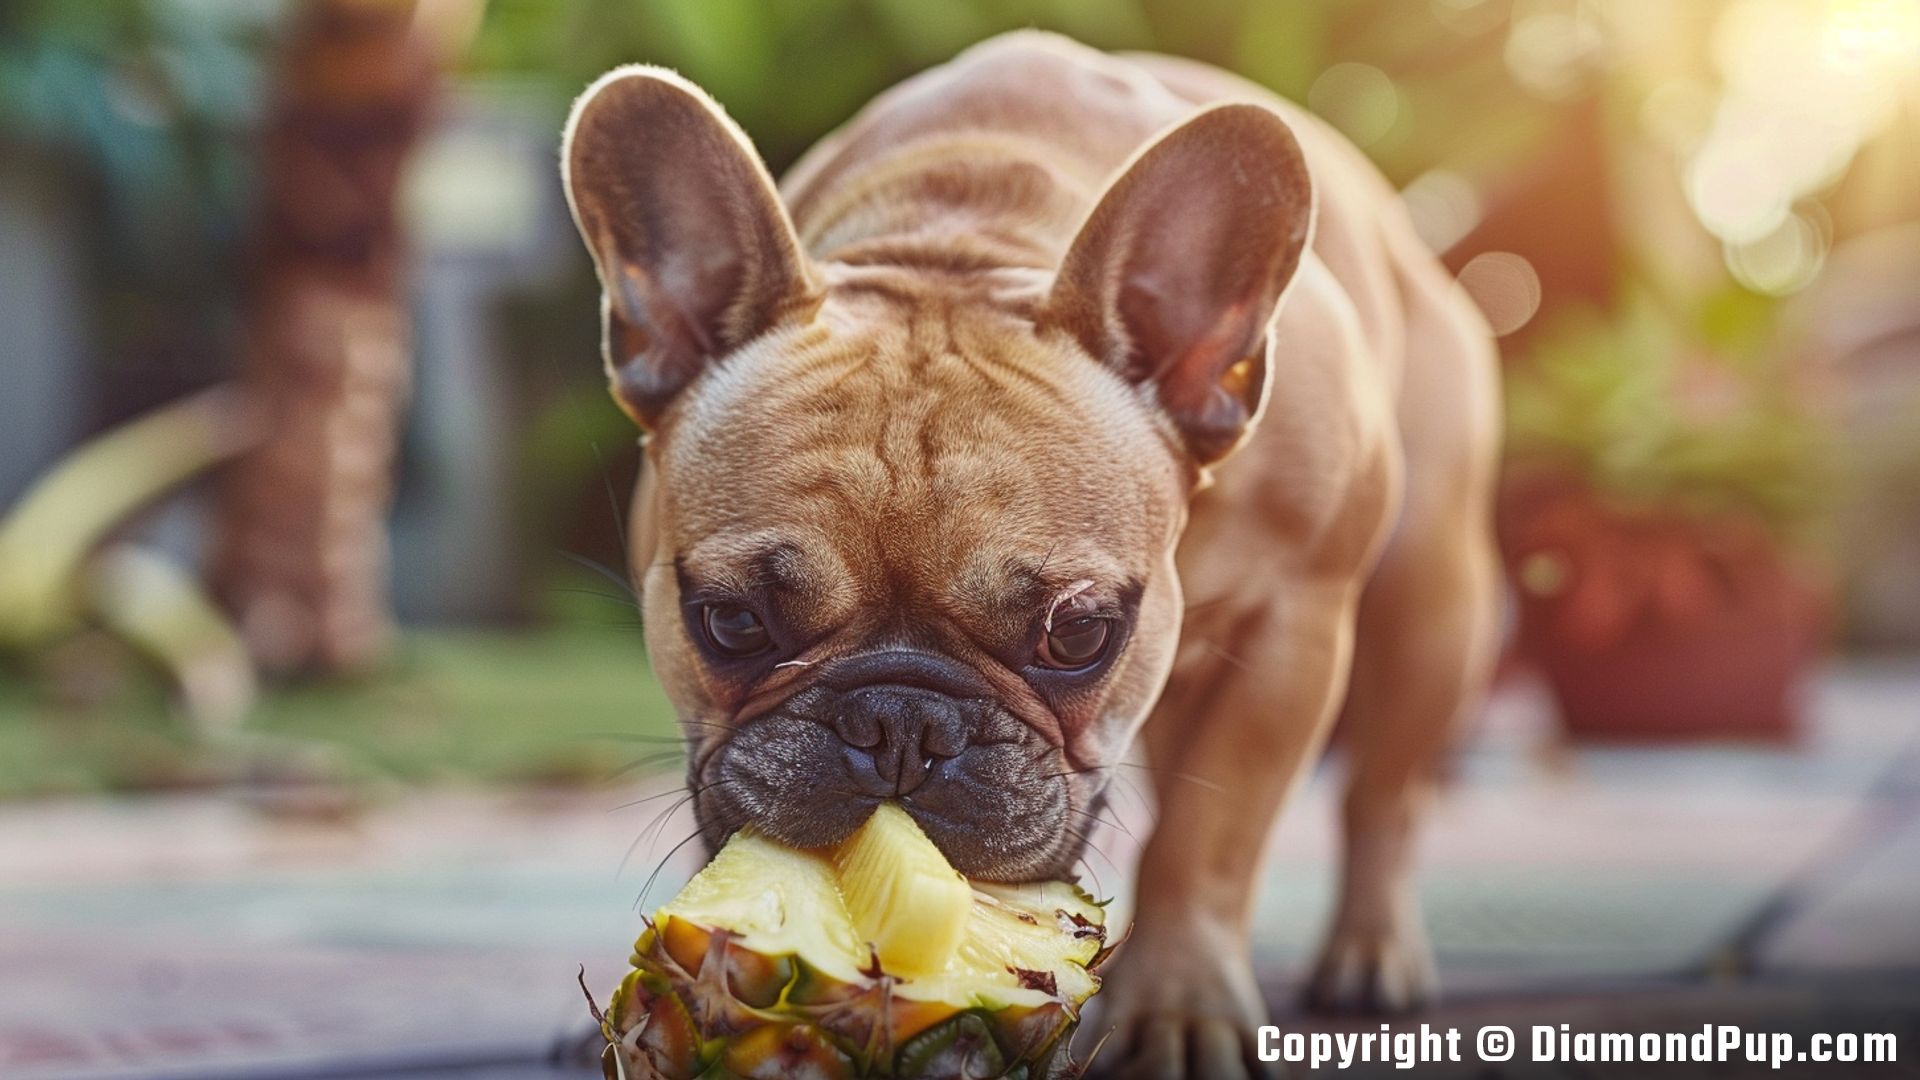 Image of French Bulldog Snacking on Pineapple